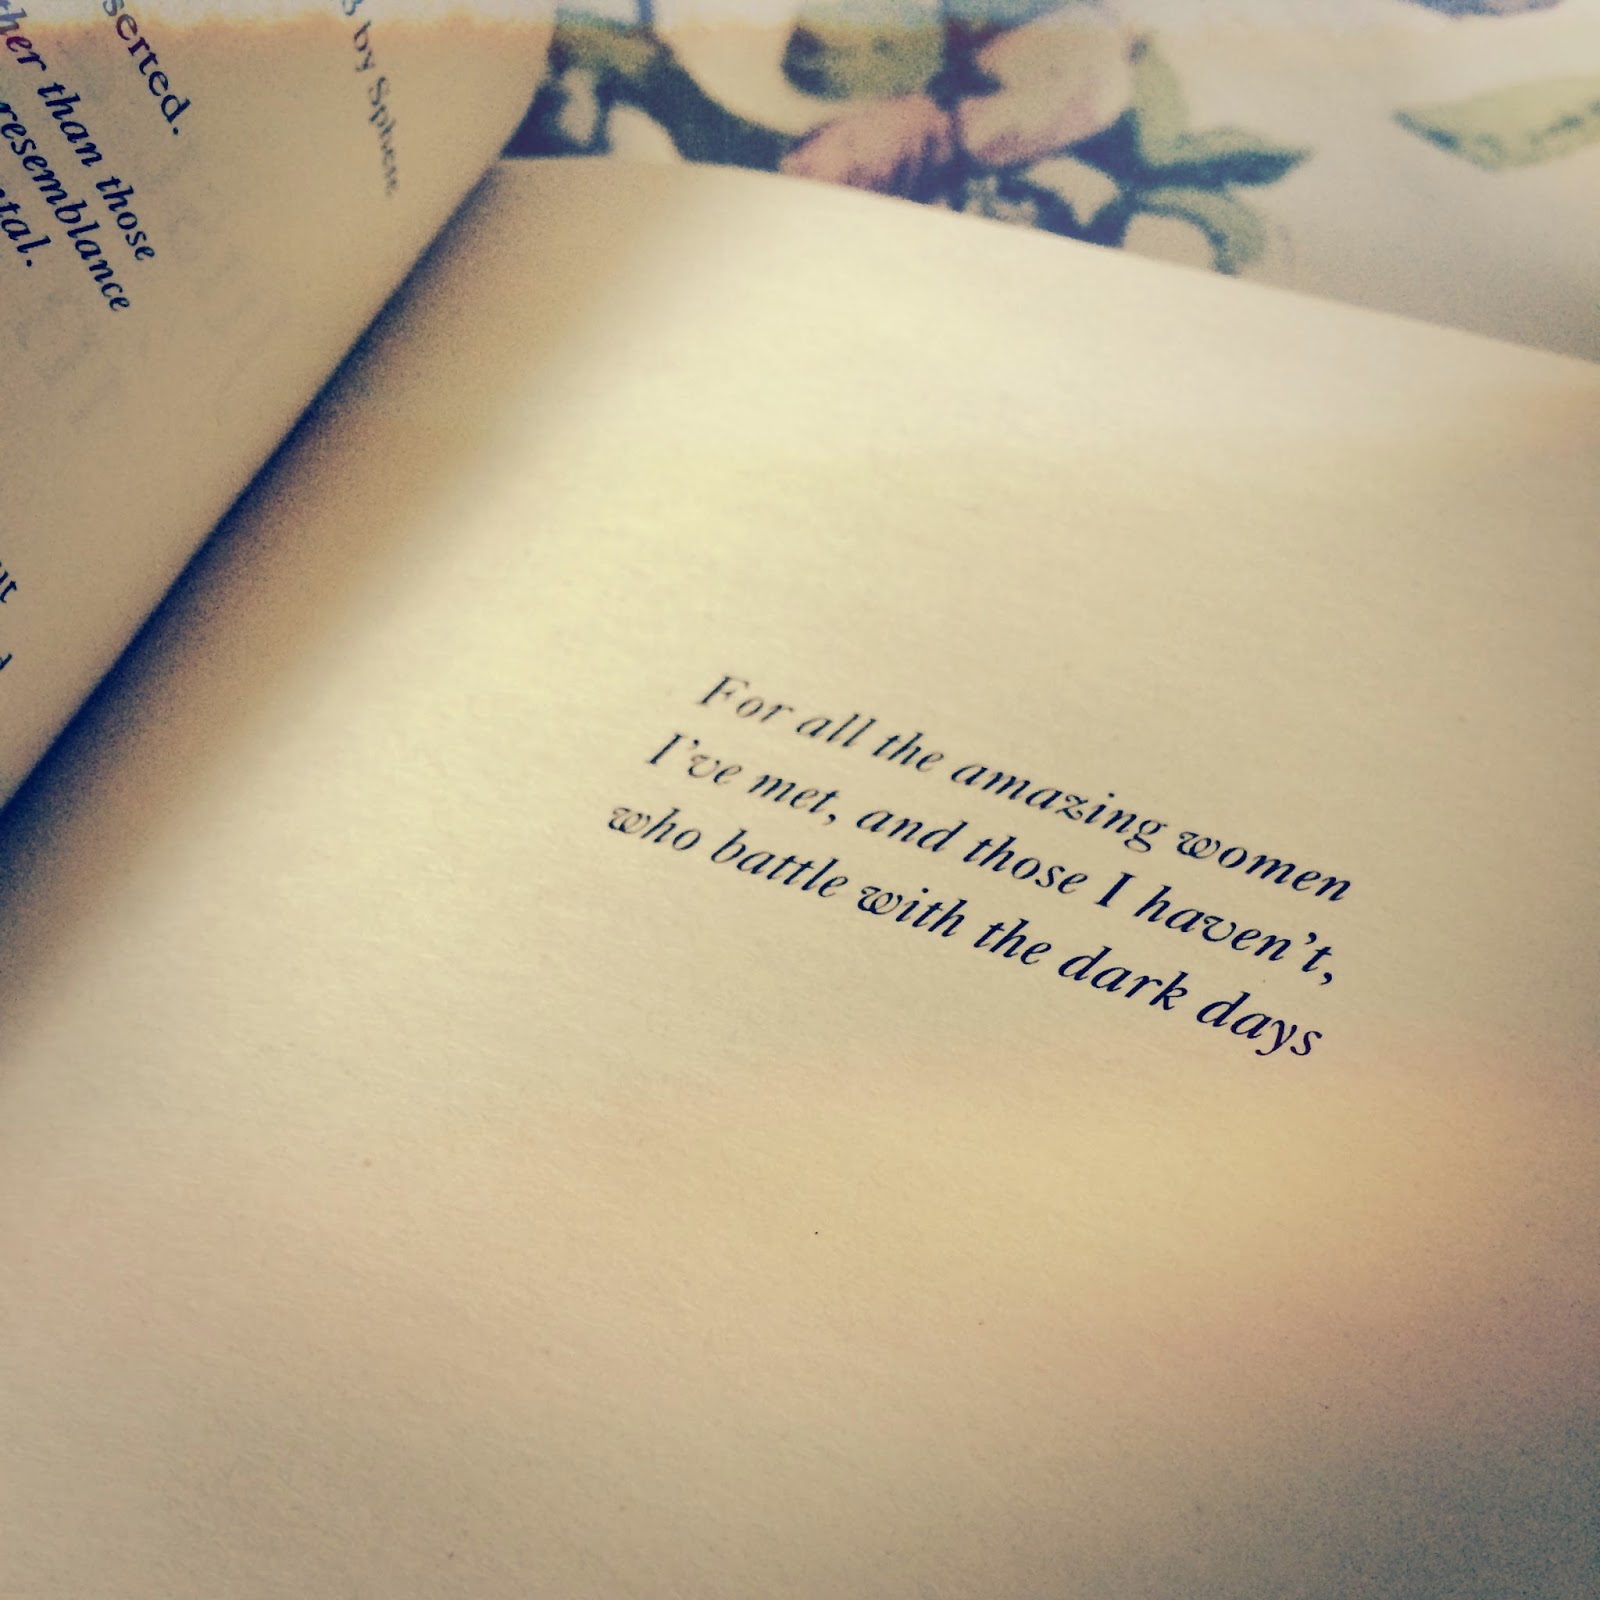 15 of the funniest book dedications ever!